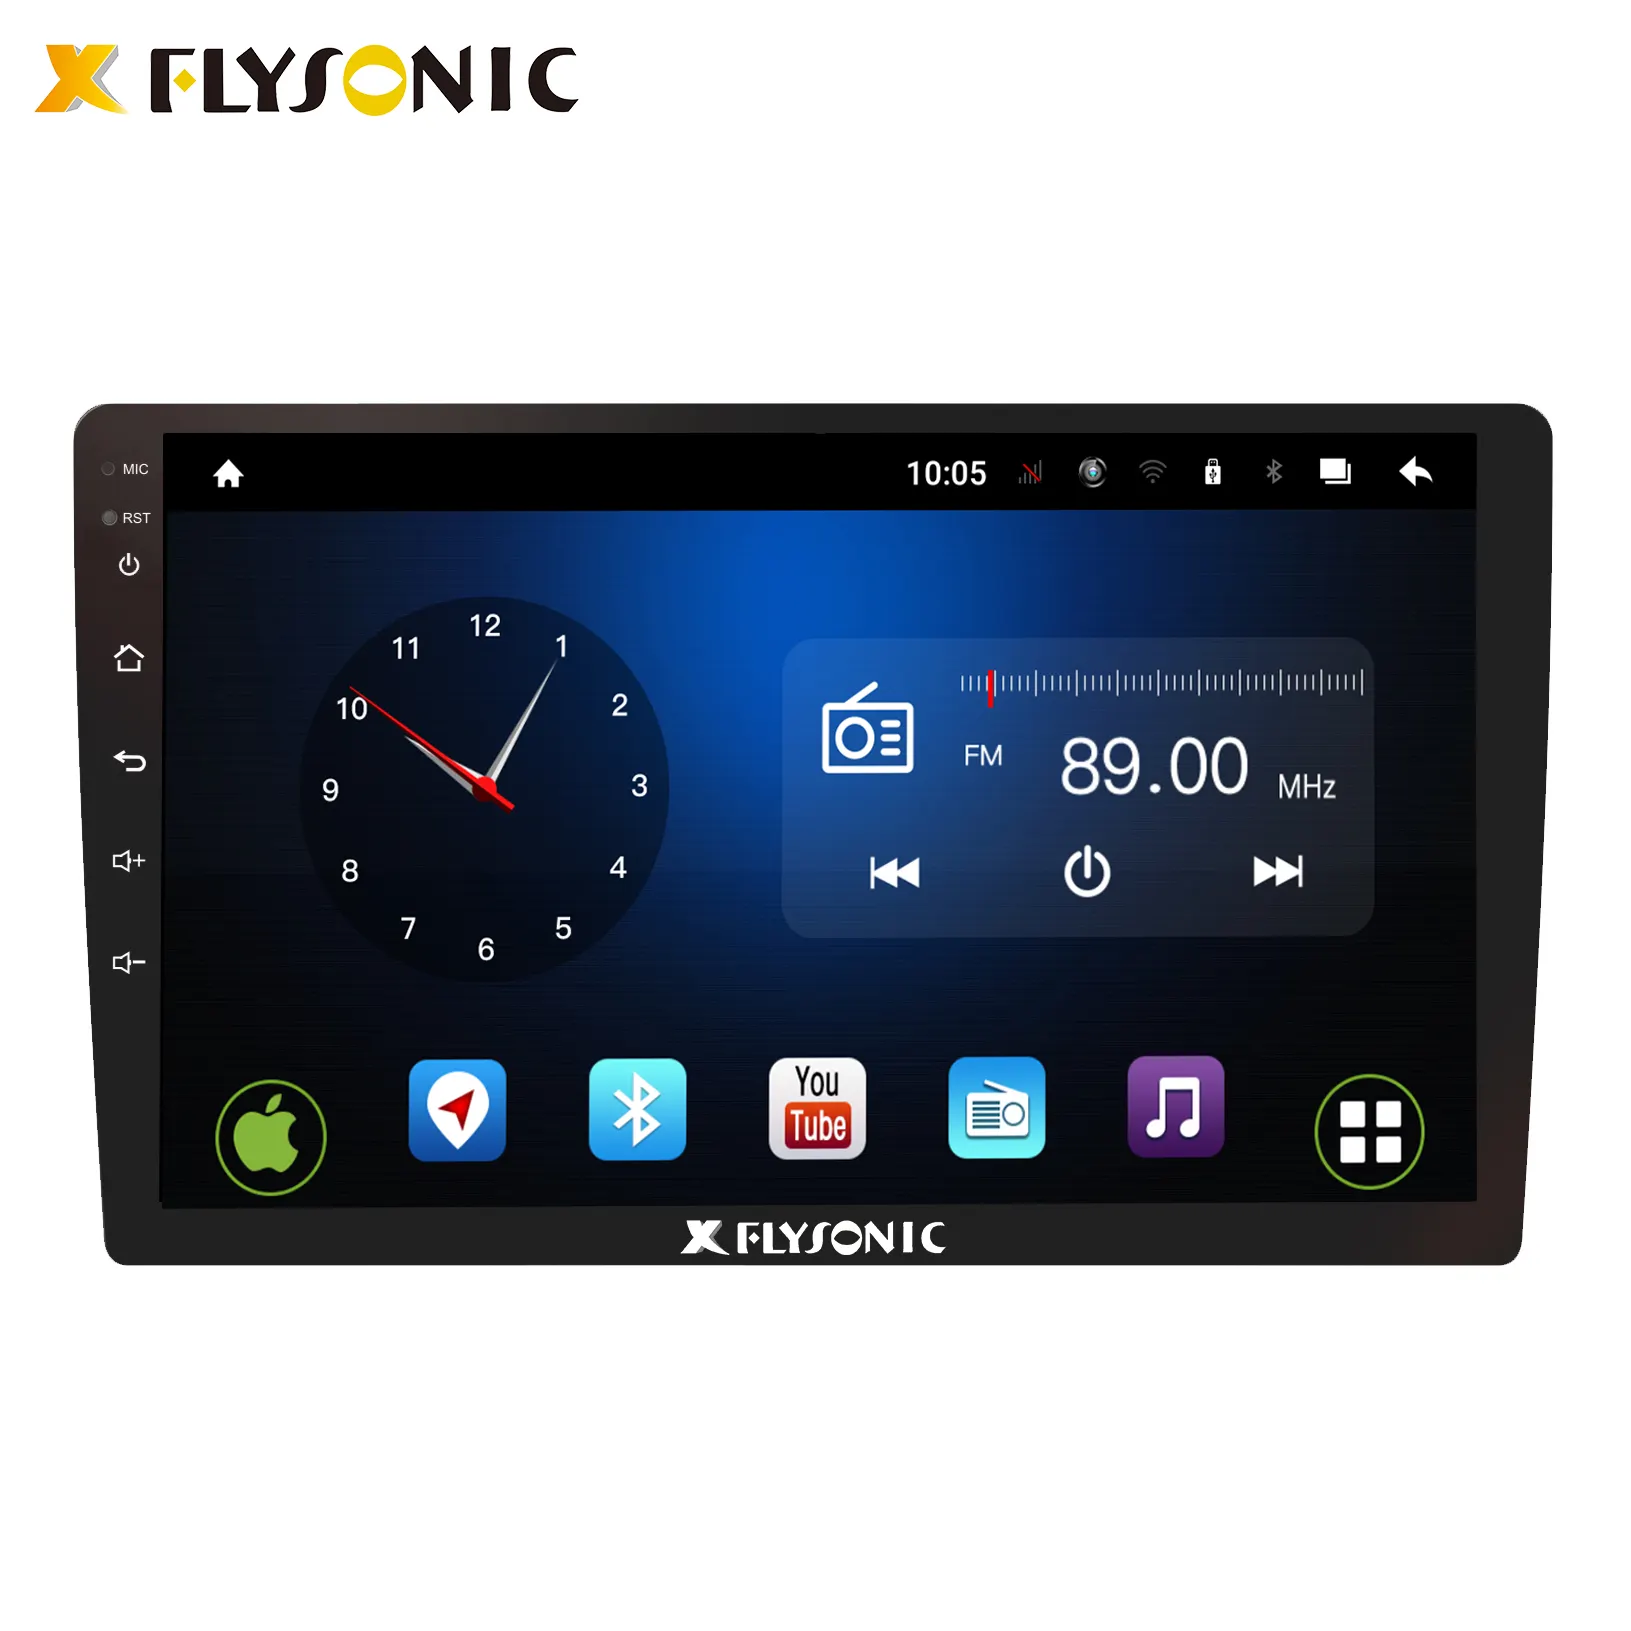 Flysonic Android Auto Monitor Real 1080p Full Hd Dvr With Night Vision Camera Box Interface For Mokka Car Video